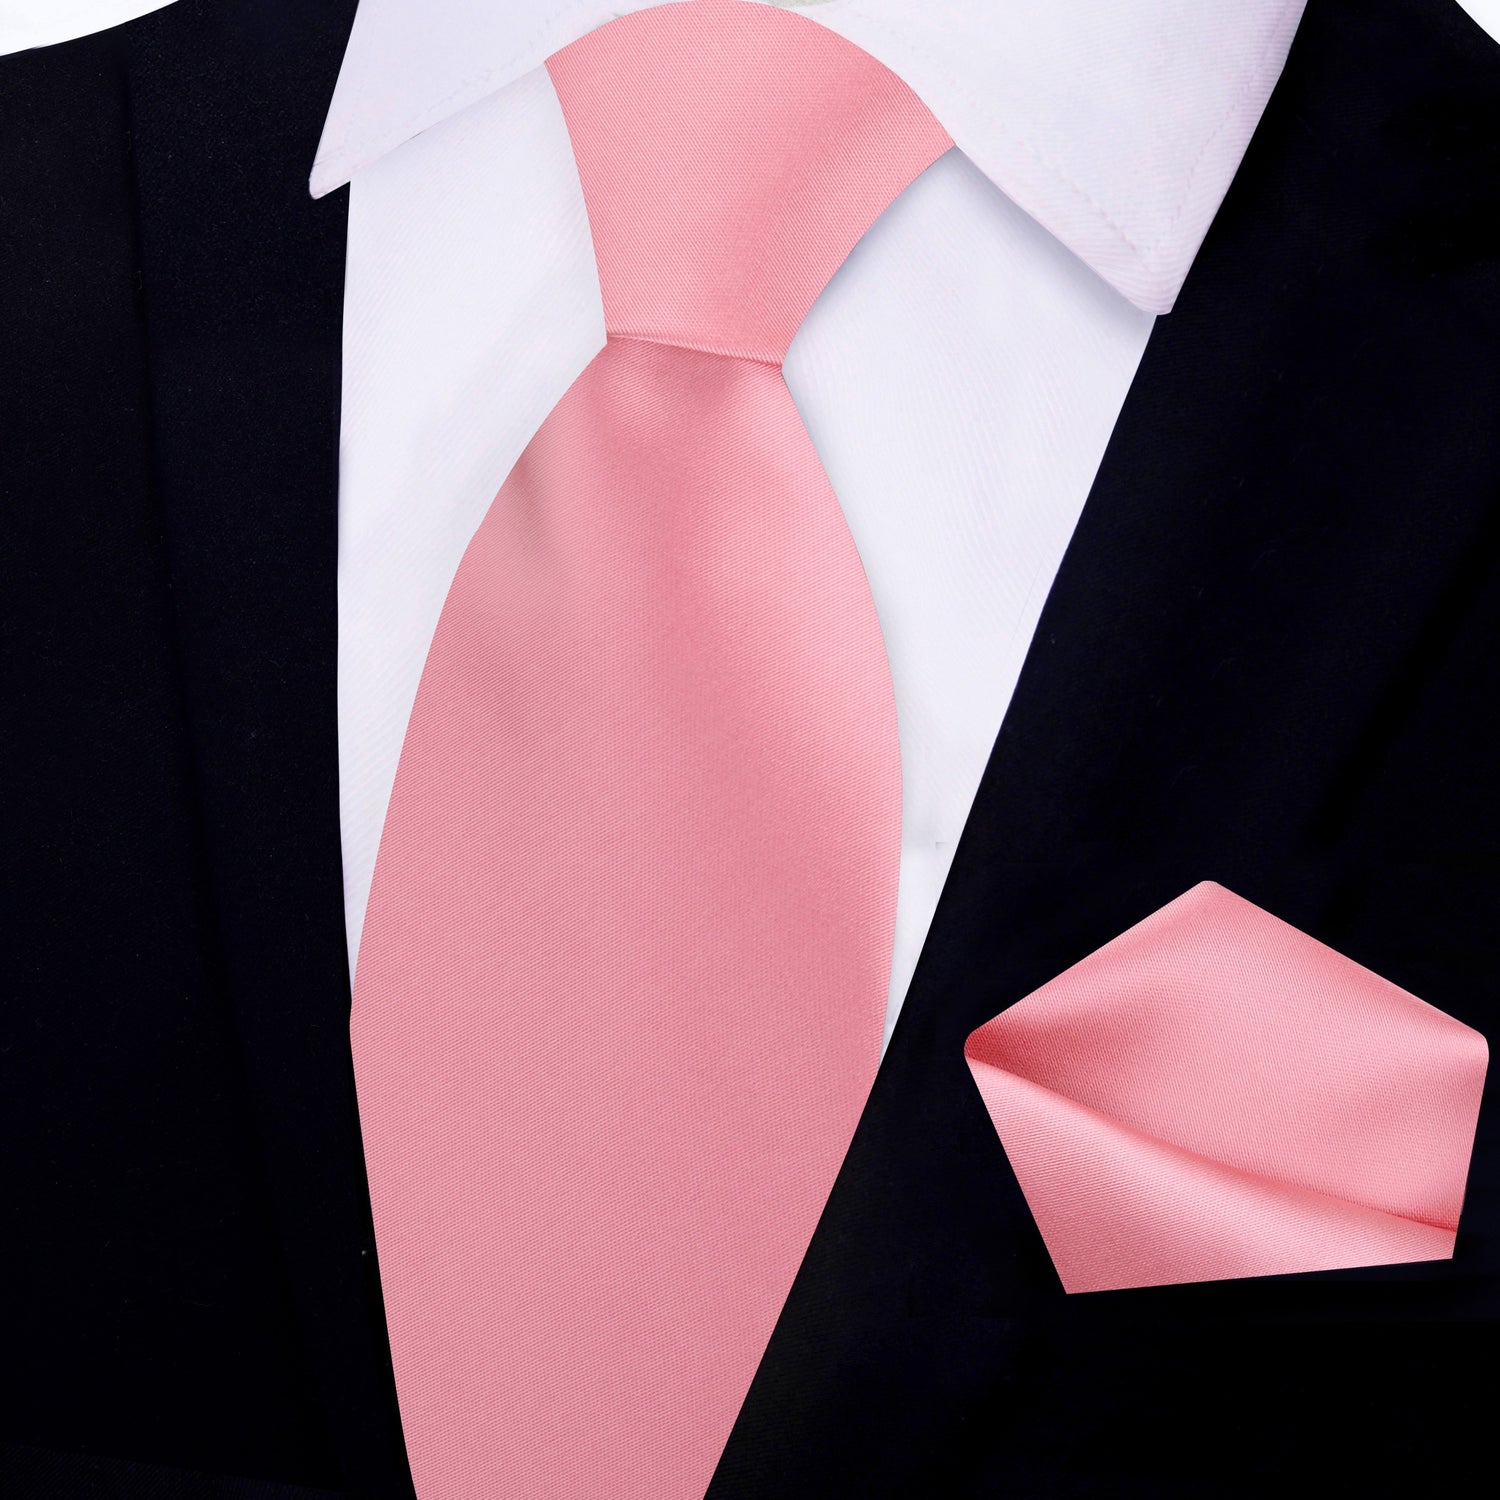 Second View: Solid Glossy Salmon Pink Tie and Pocket Square